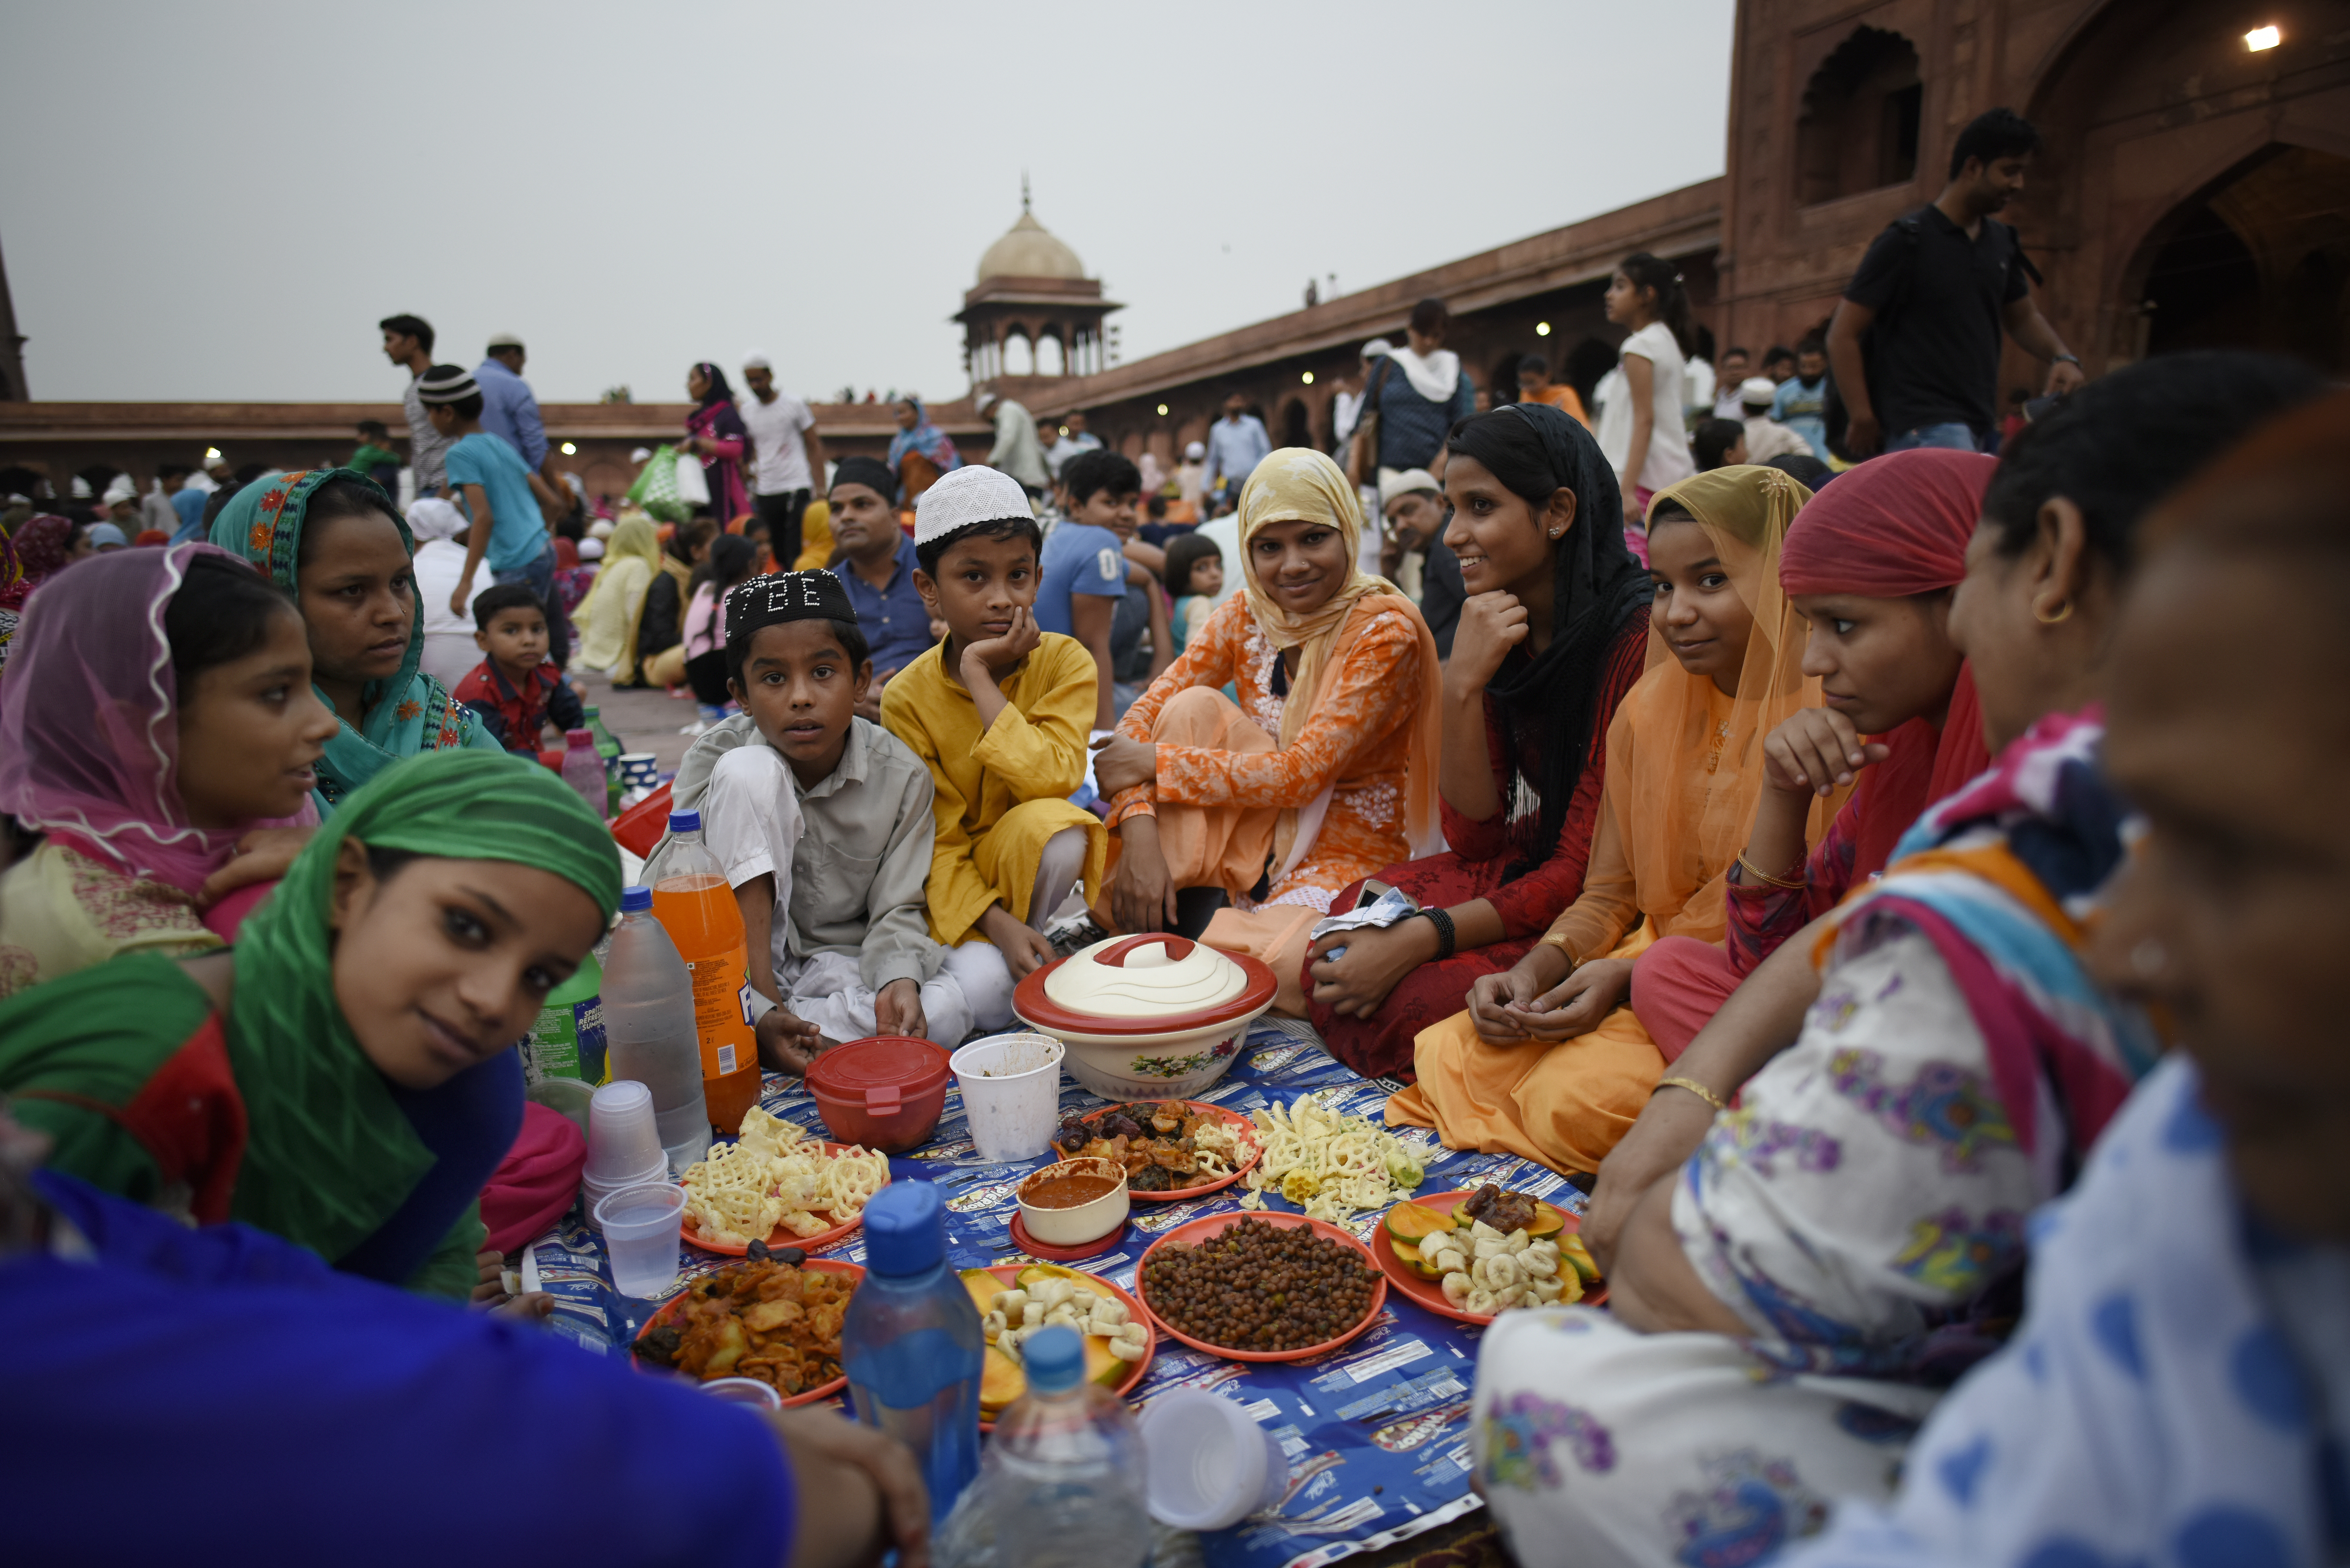 Muslims wait to break their fast on the 21st day of the holy month of Ramadan at Jama Masjid on June 6, 2018, in New Delhi, India.